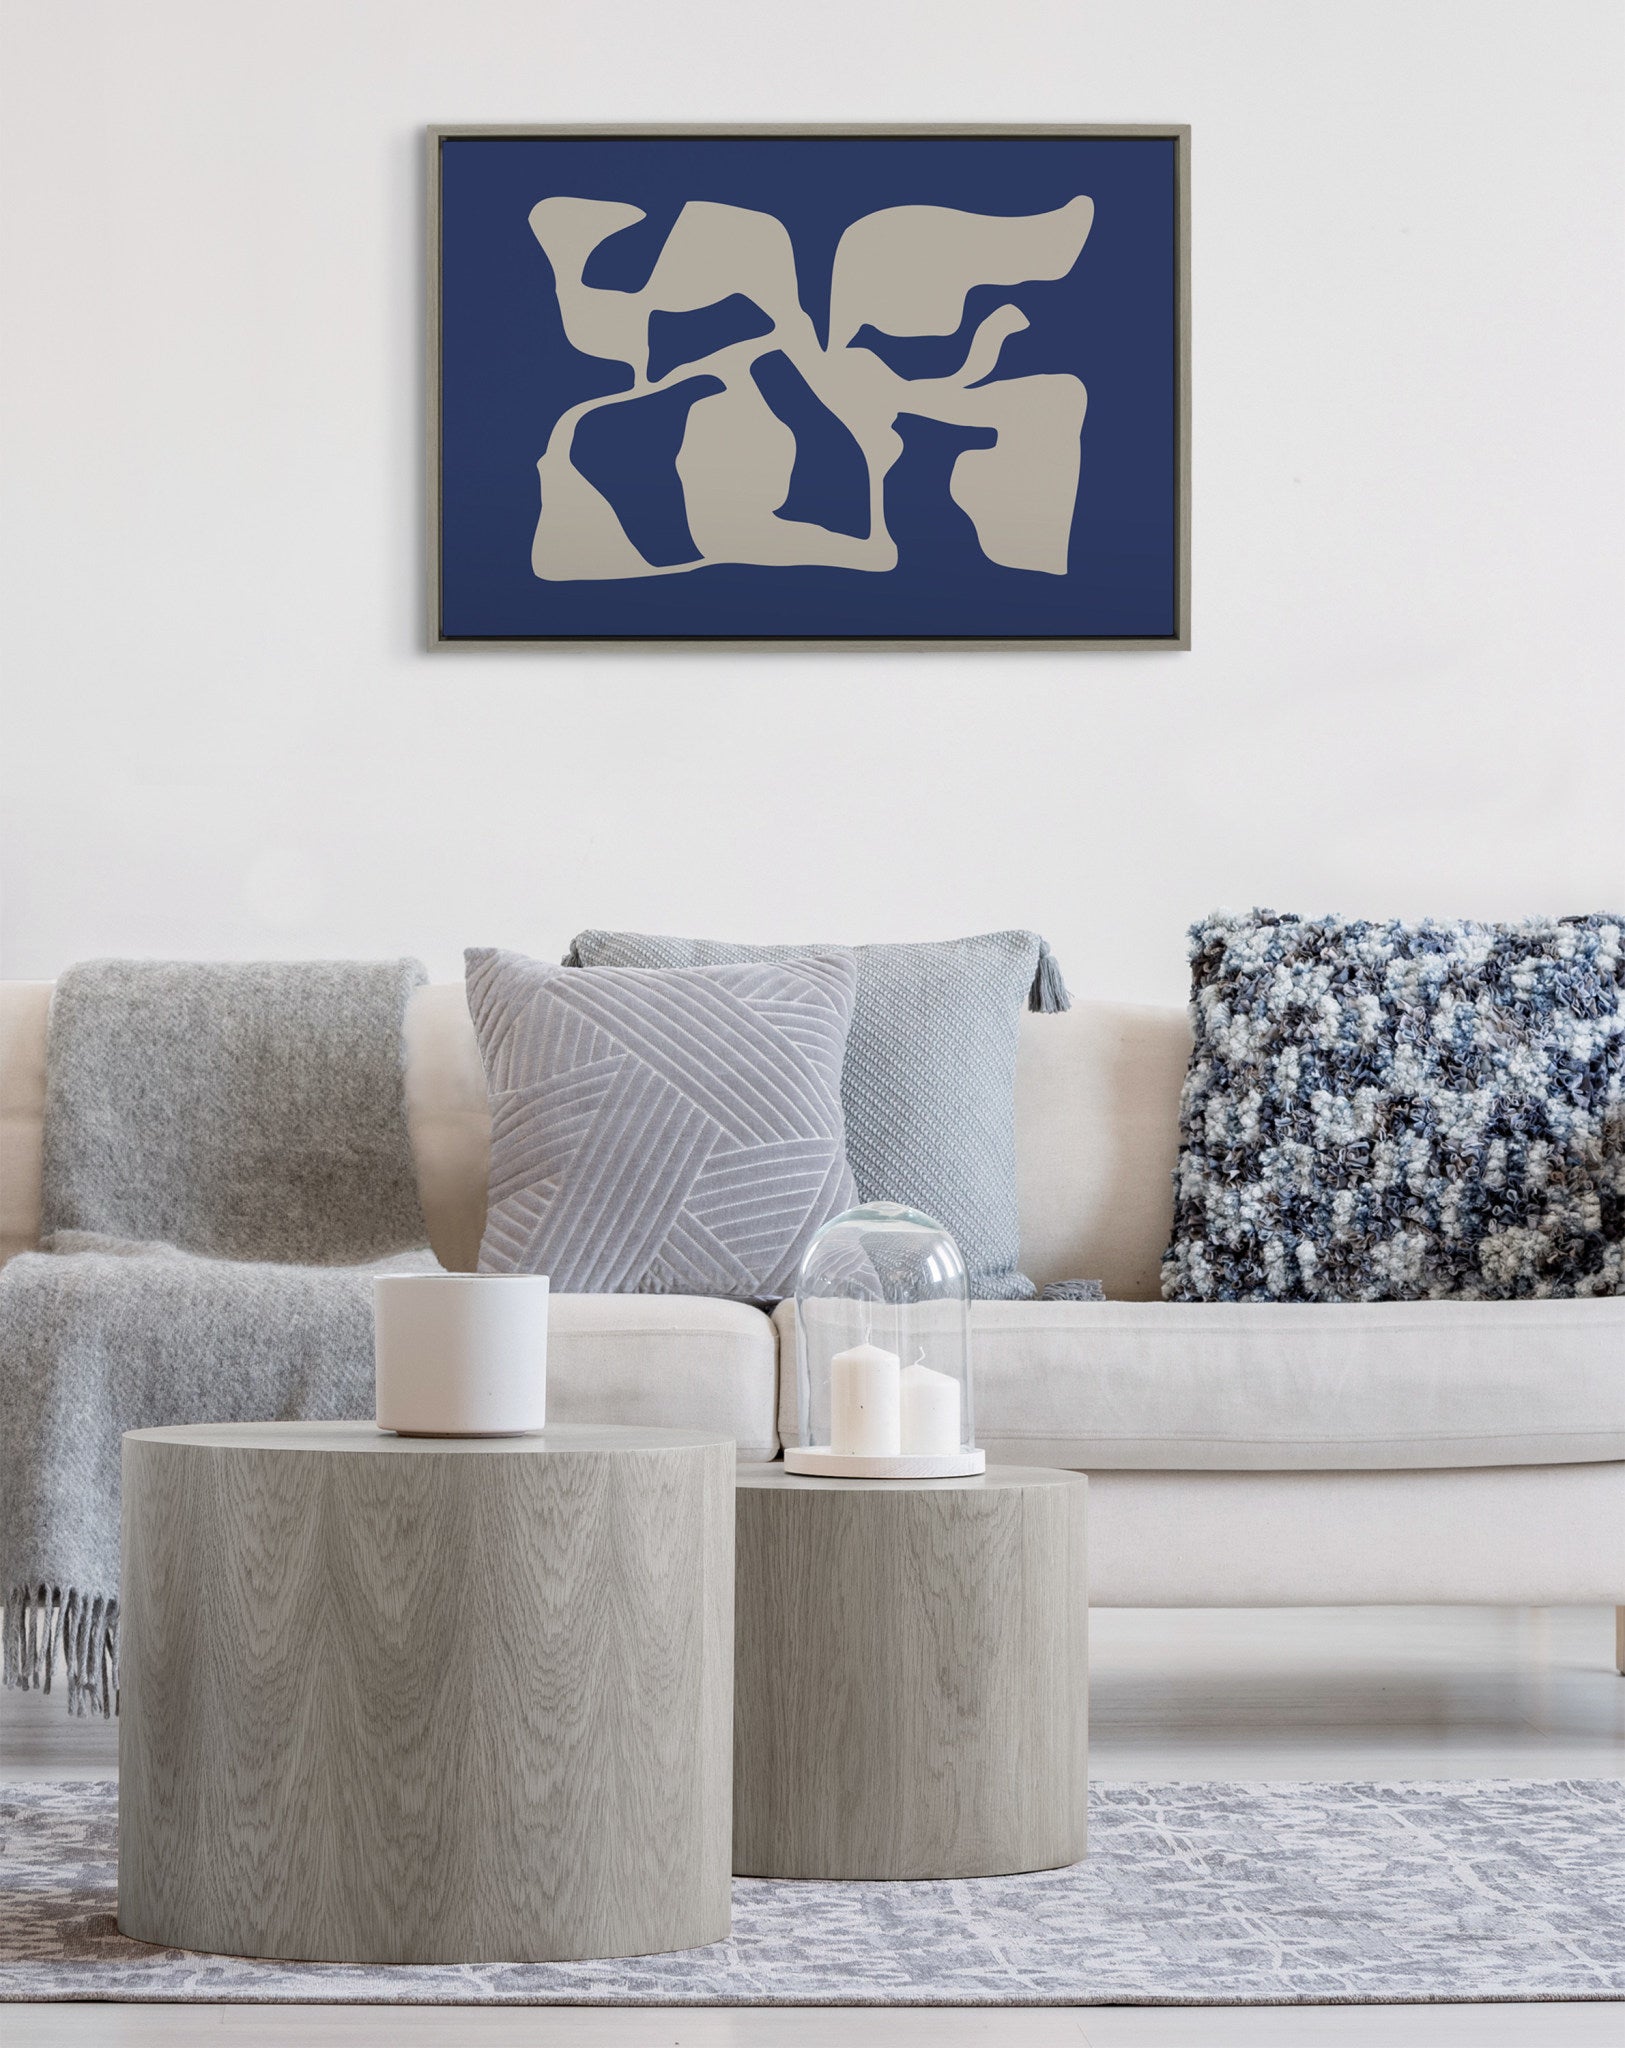 Sylvie Distorted Shapes of Blue and Tan Framed Canvas by The Creative Bunch Studio